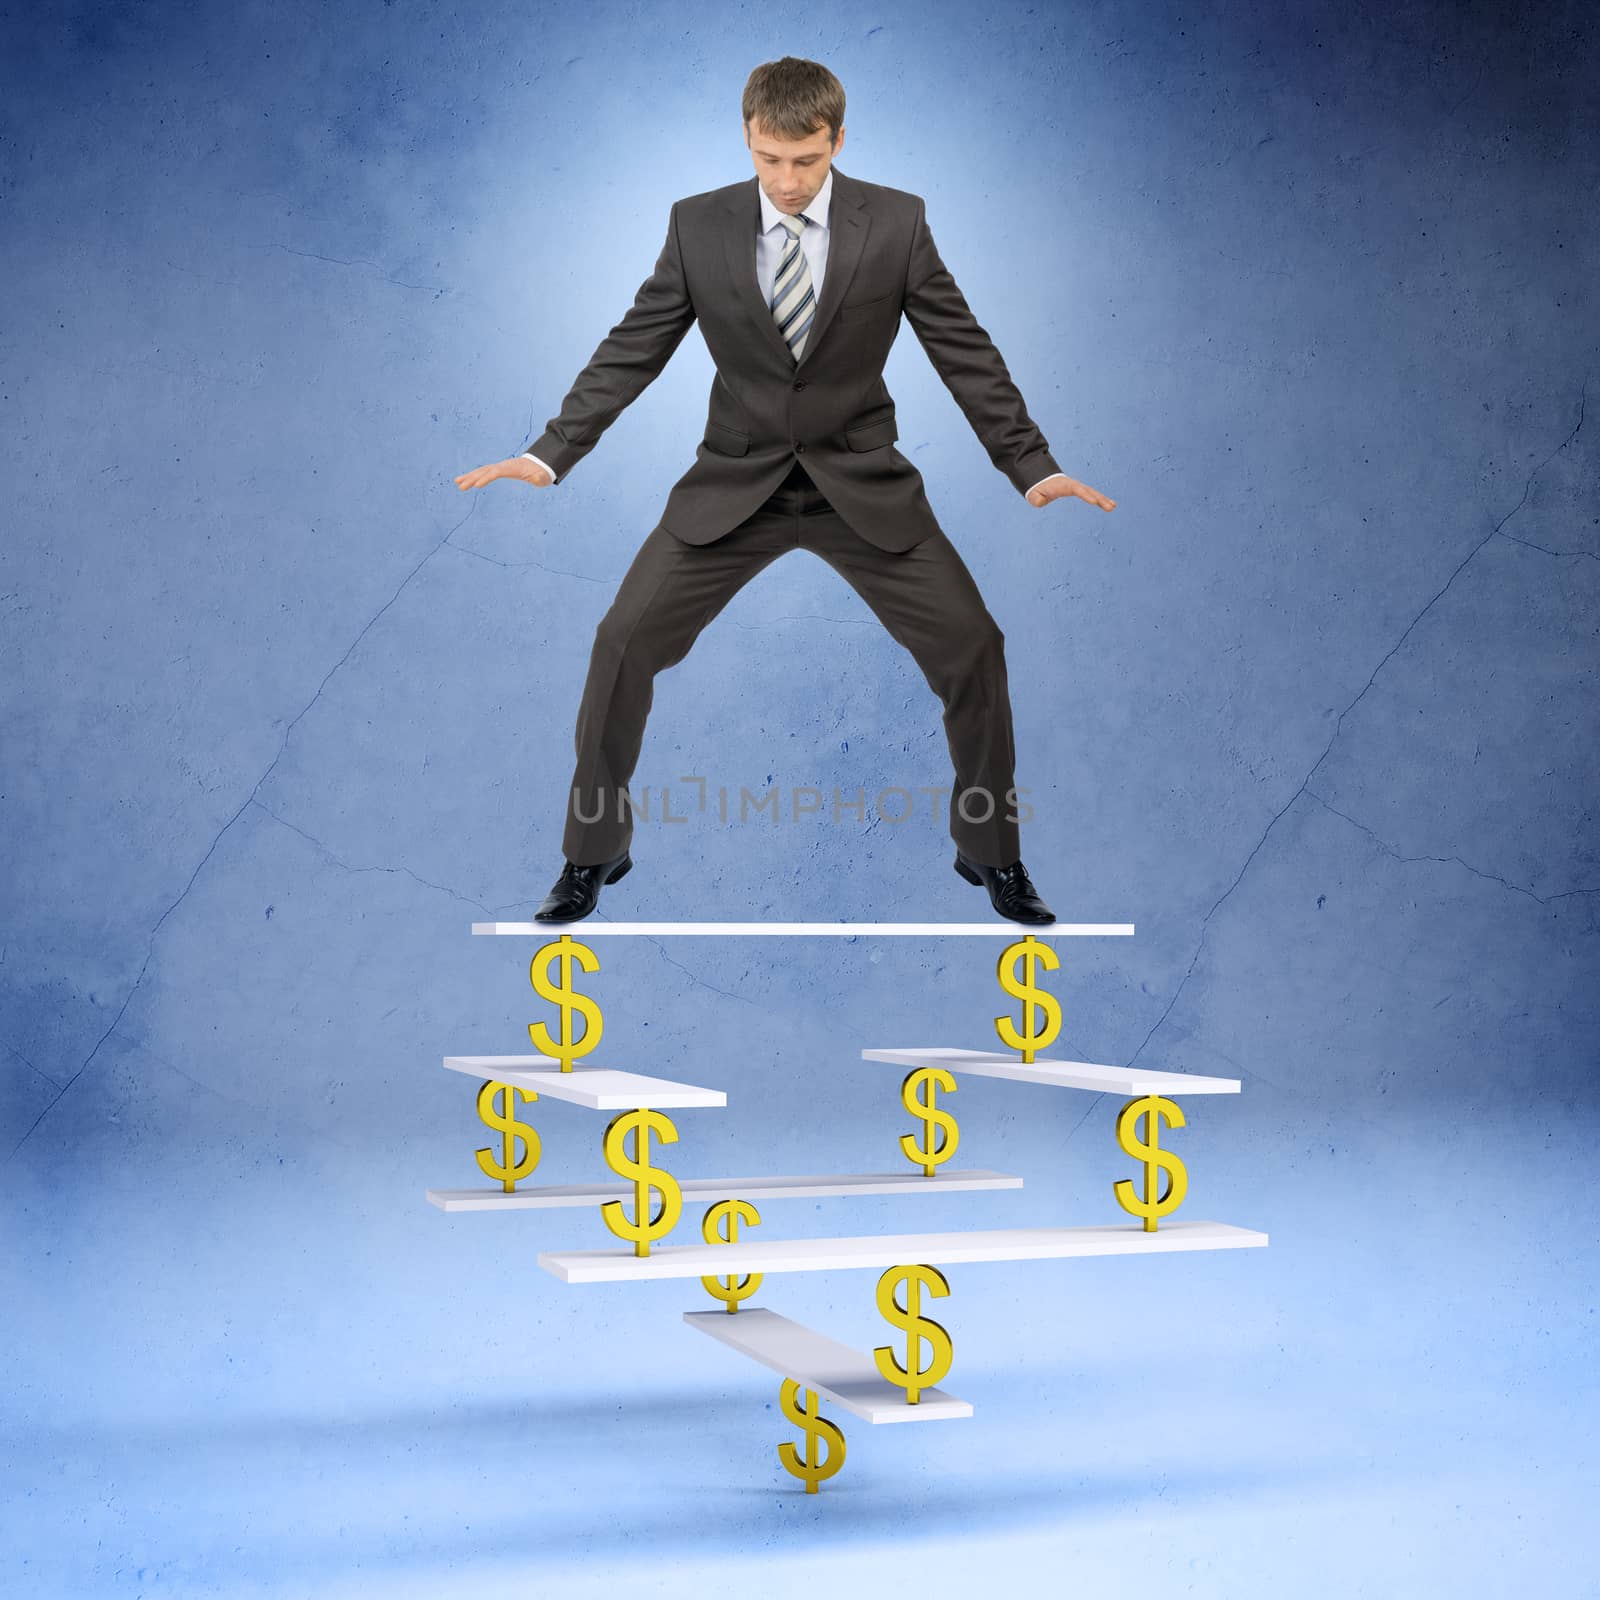 Businessman standing on balance with dollar sign and looking down